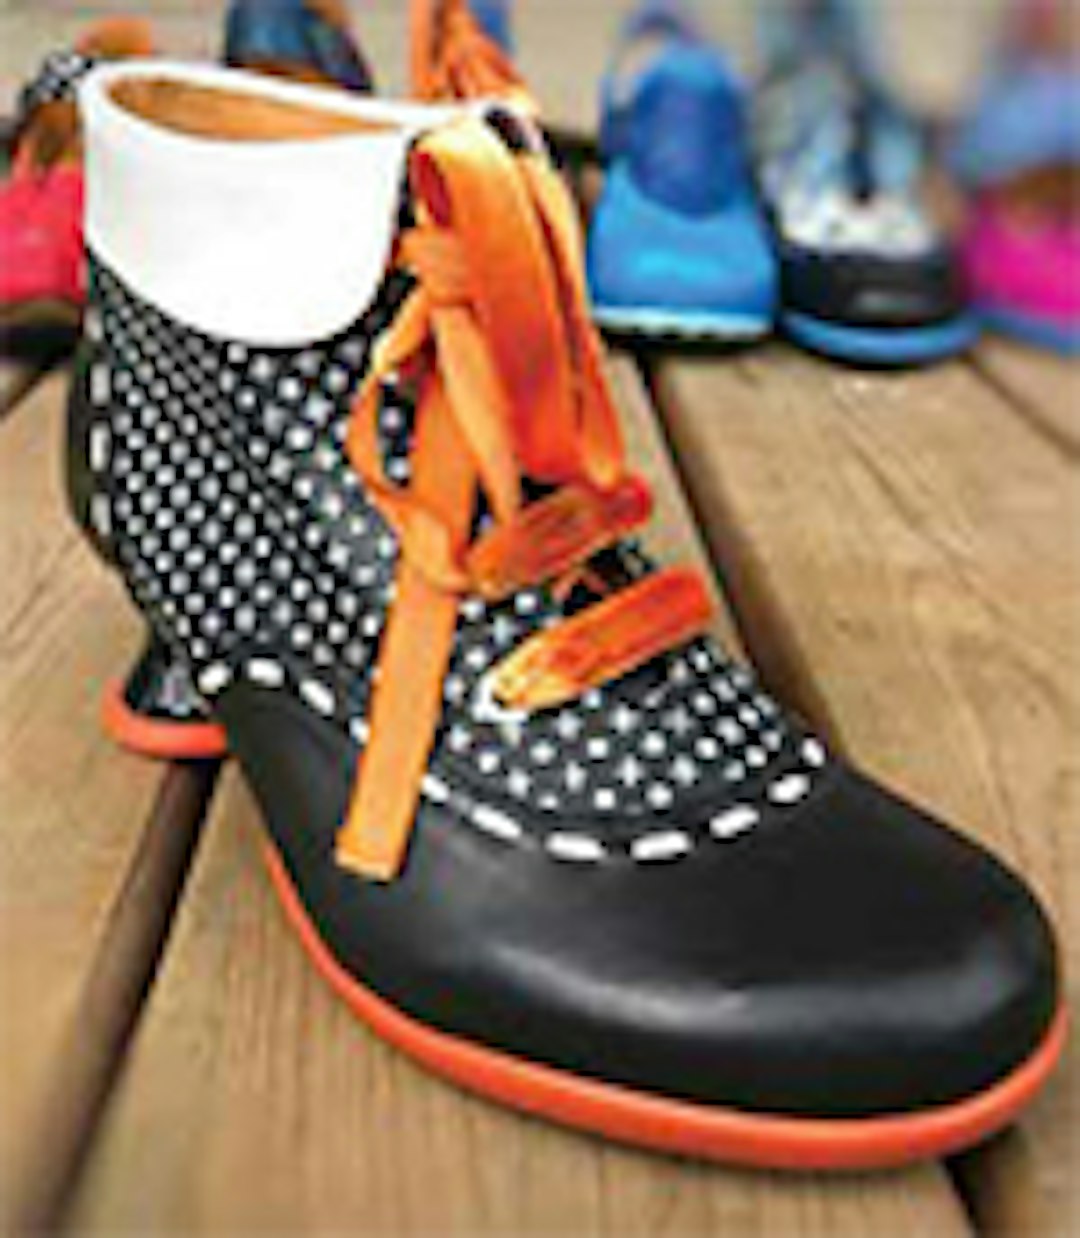 A stylish black and white patterned shoe with orange laces, displayed on a wooden floor with a blurred background of various other shoes.